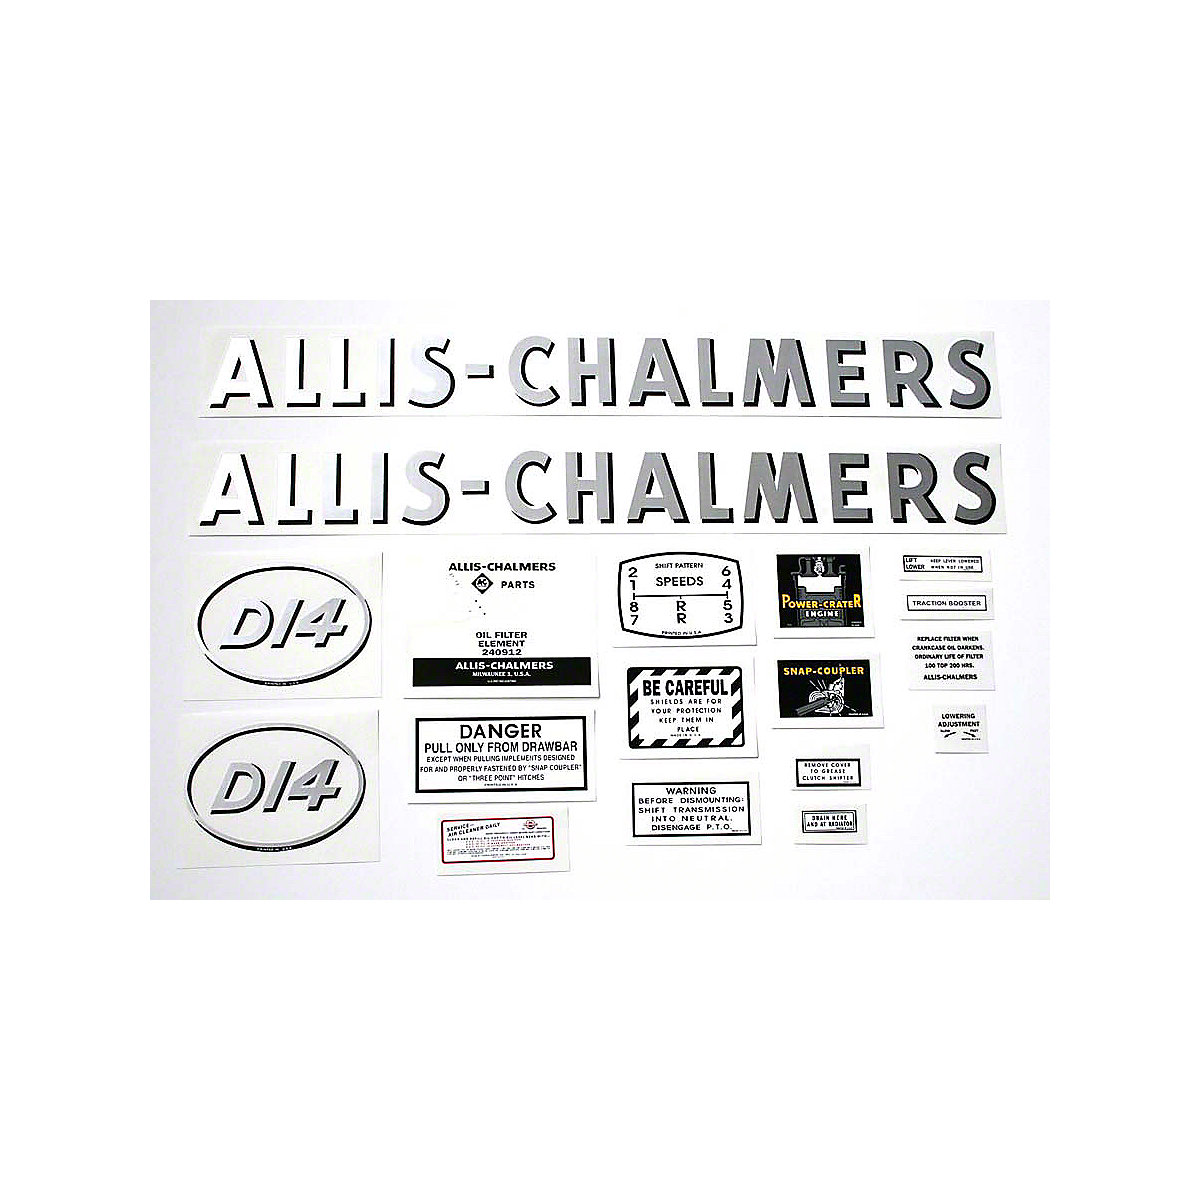 Decal Set For Allis Chalmers: D14 Gas